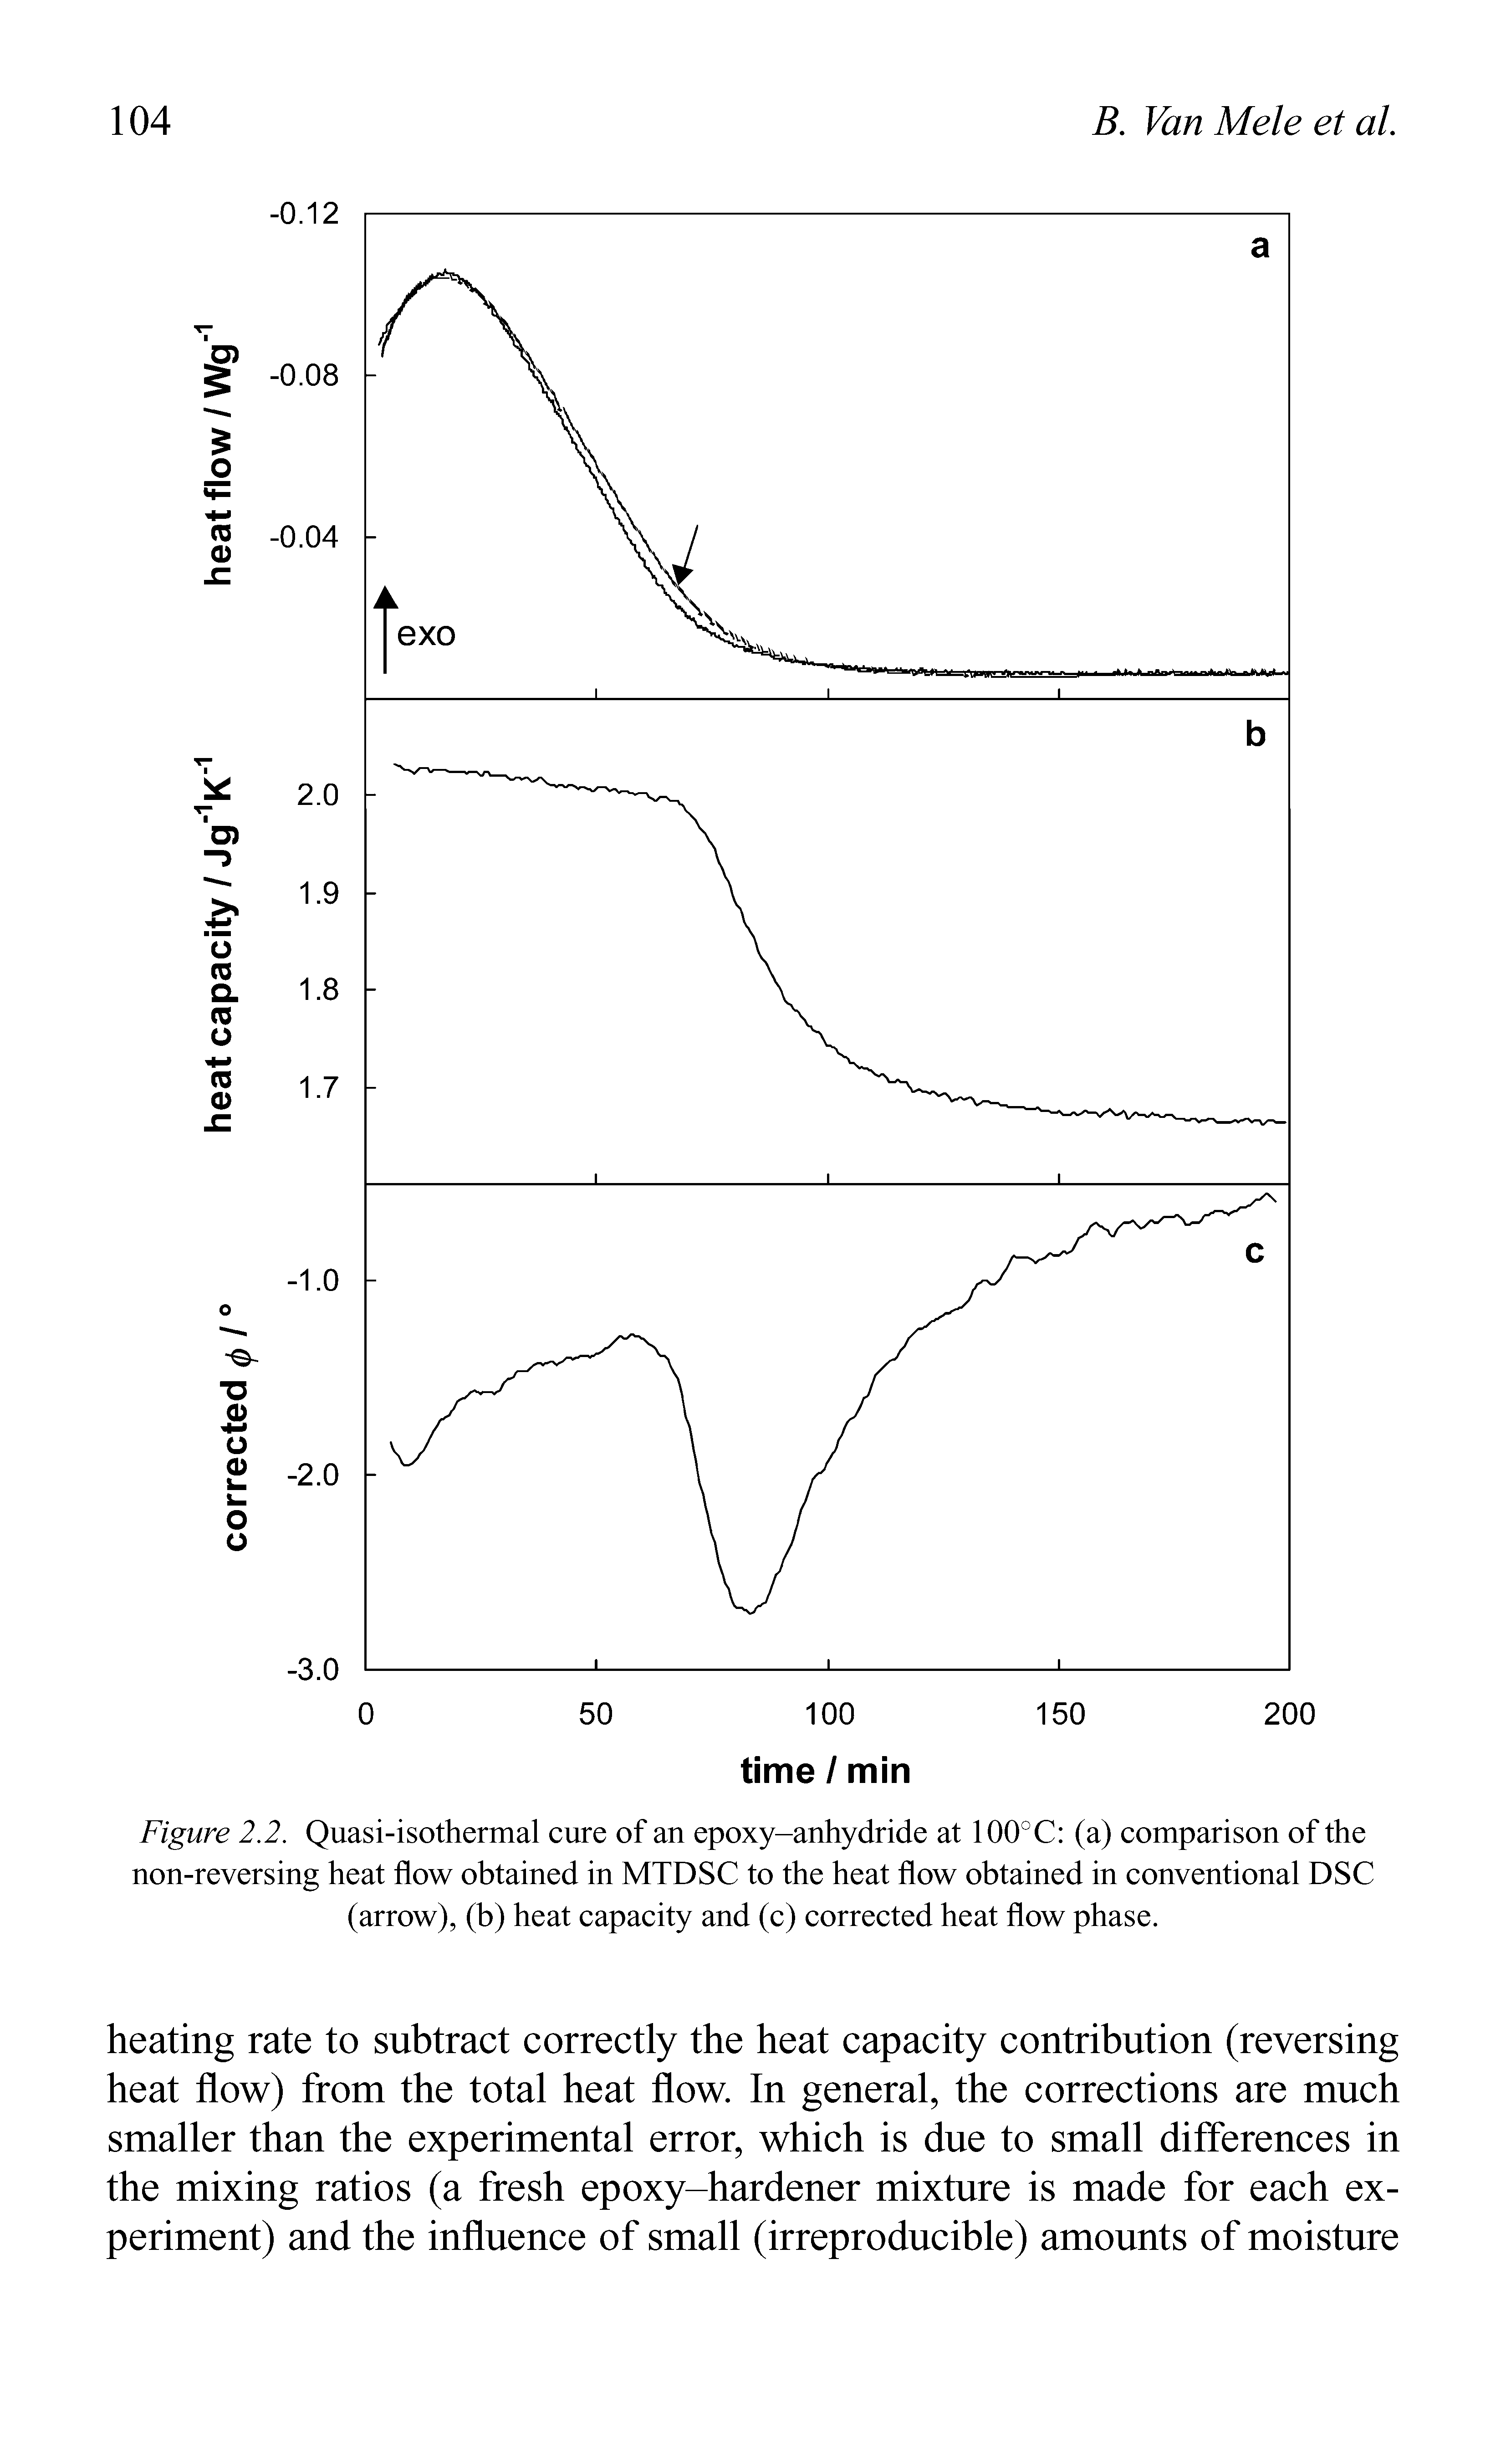 Figure 2.2. Quasi-isothermal cure of an epoxy-anhydride at 100°C (a) comparison of the non-reversing heat flow obtained in MTDSC to the heat flow obtained in conventional DSC (arrow), (b) heat capacity and (c) corrected heat flow phase.